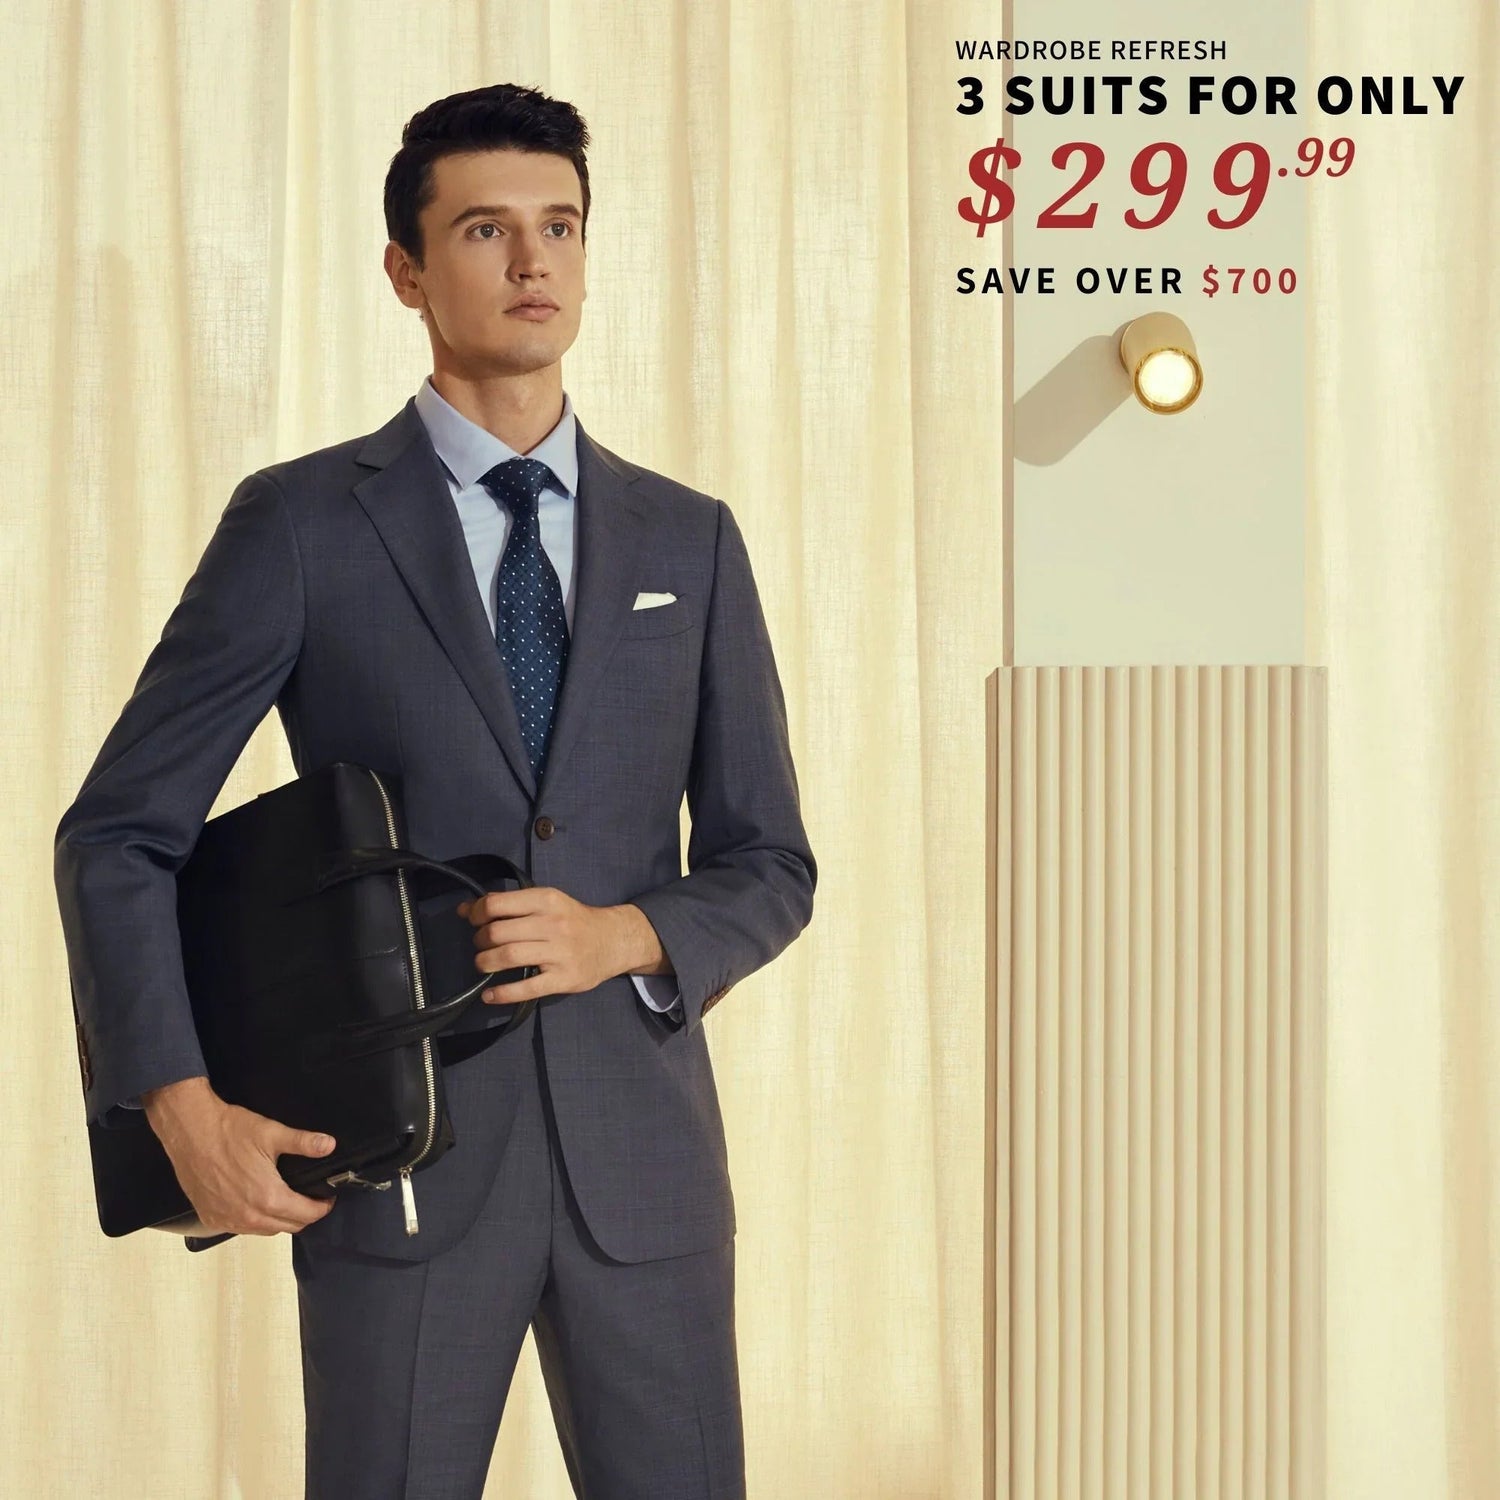 A man in a suit is holding a briefcase, showcasing the perfect fit of his BYOB 3 Suits for $299.